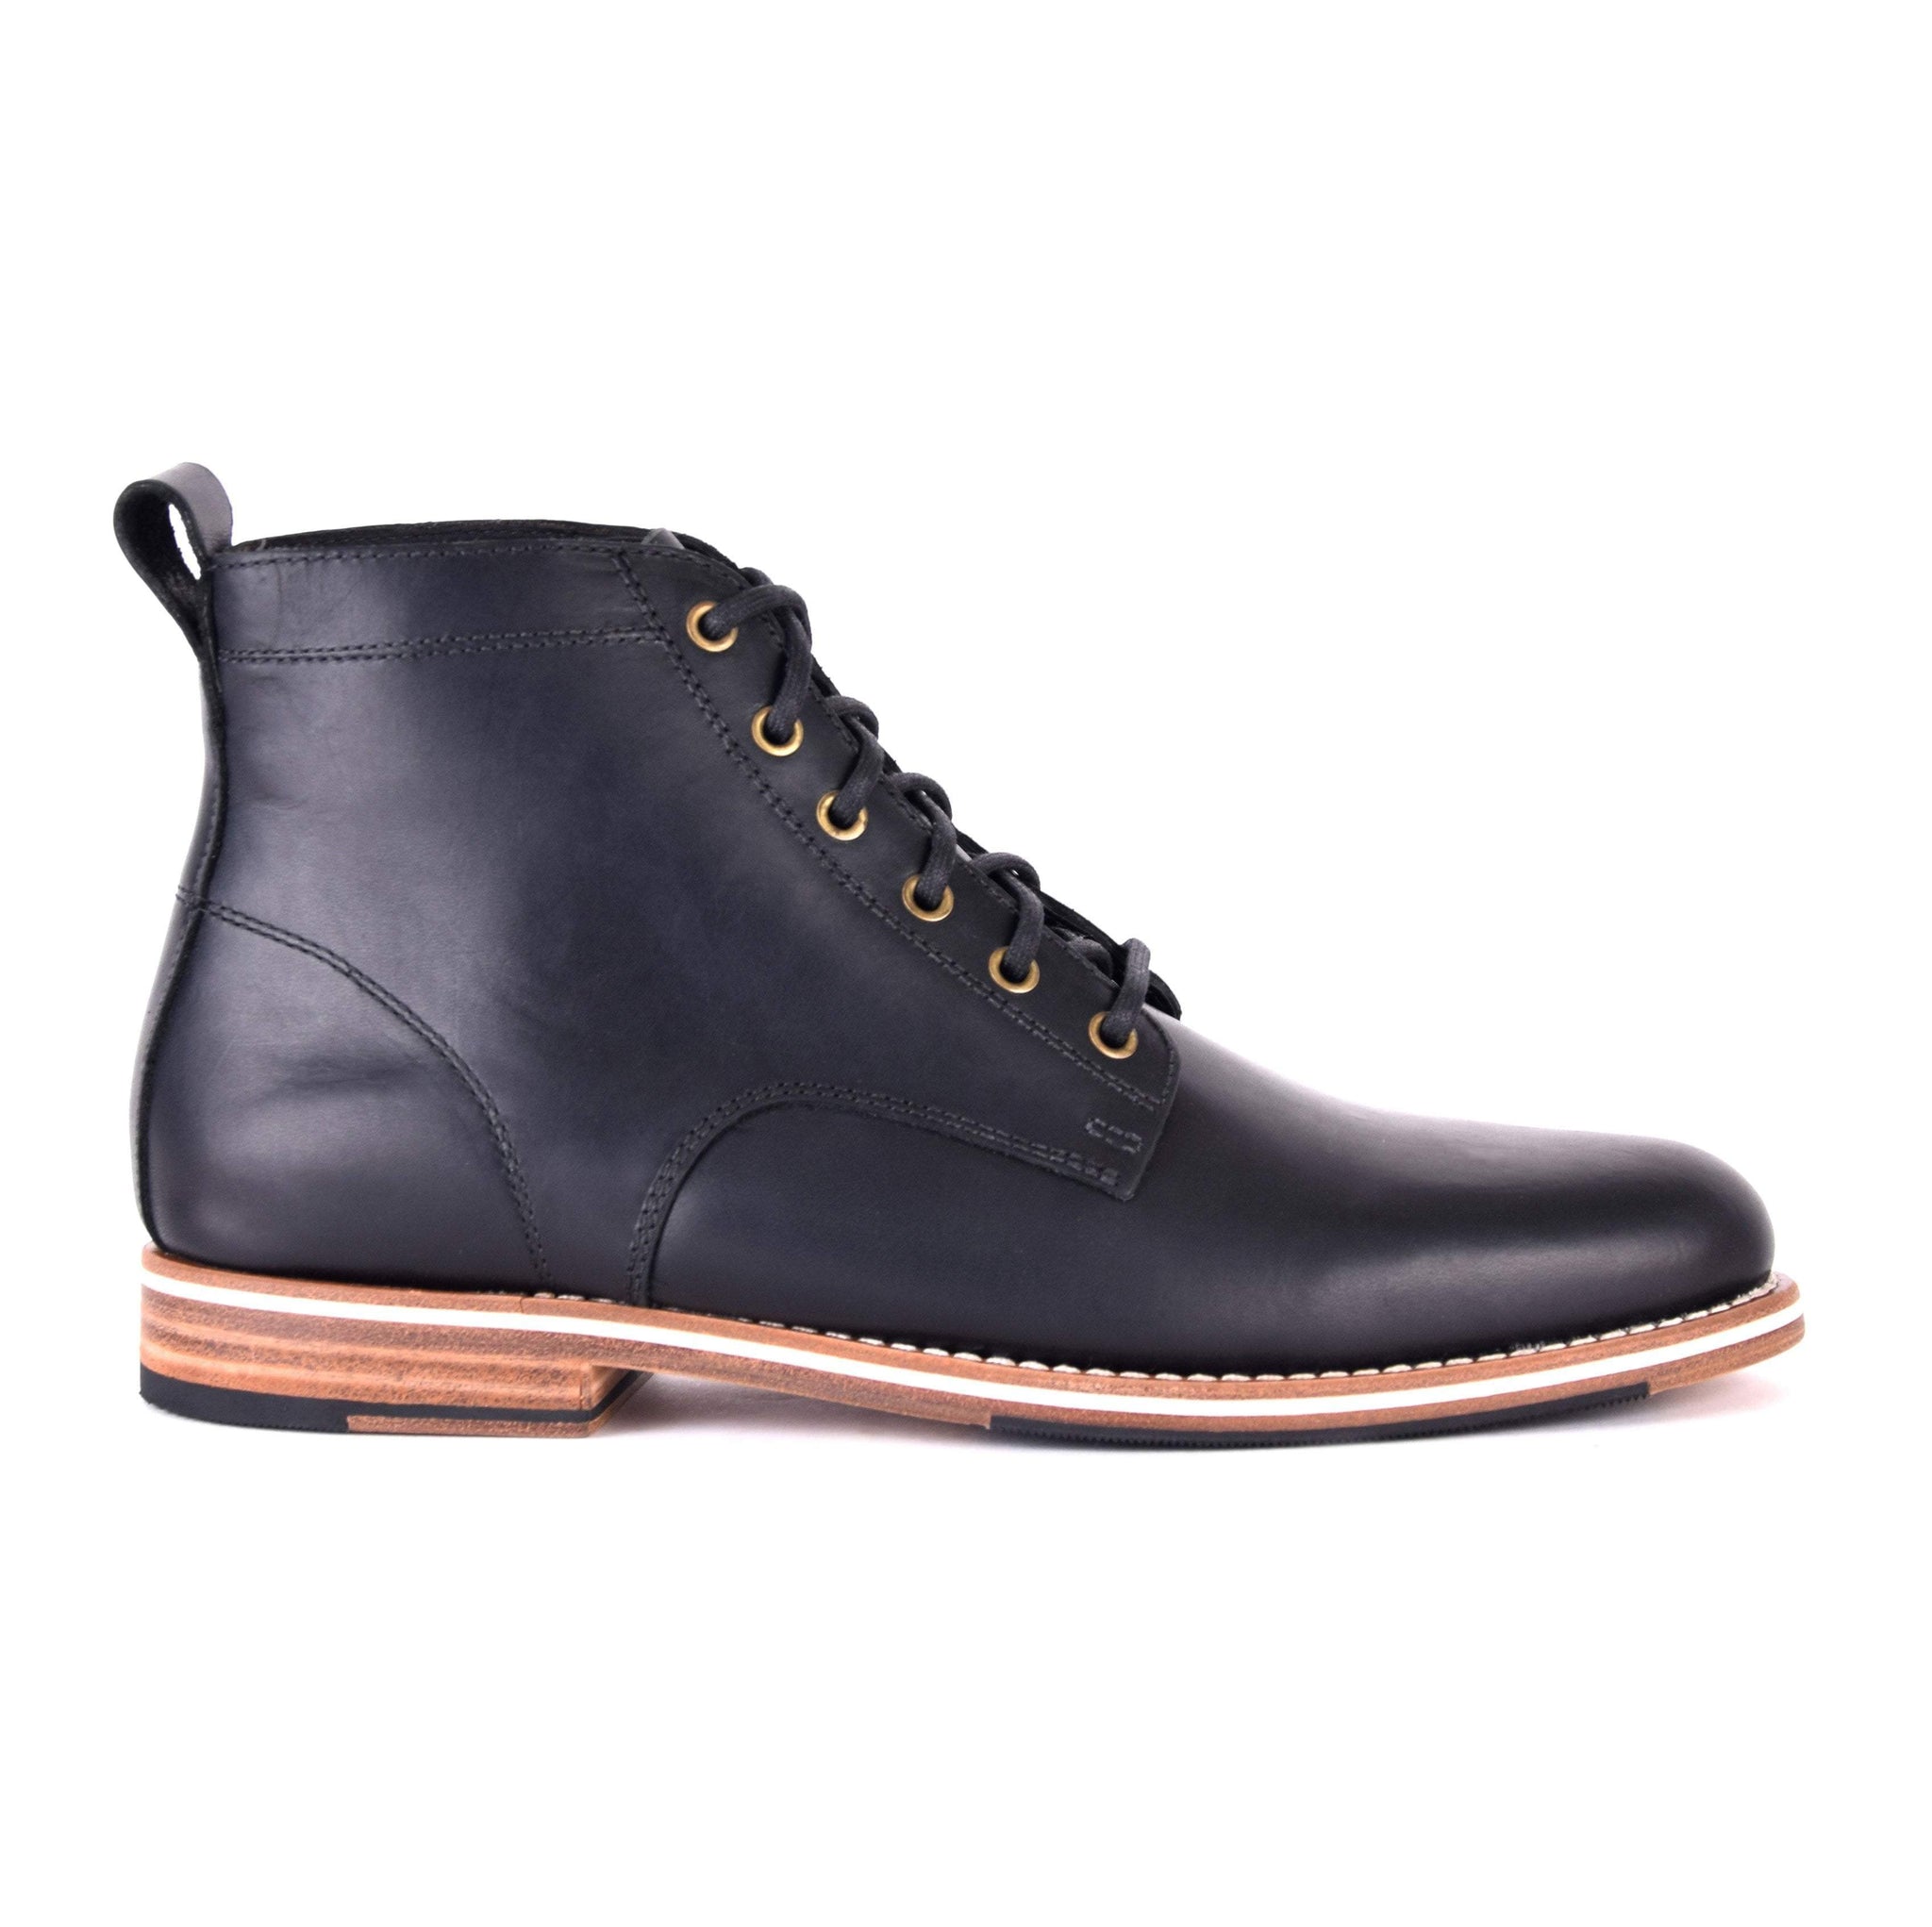 The Zind Black by HELM Boots